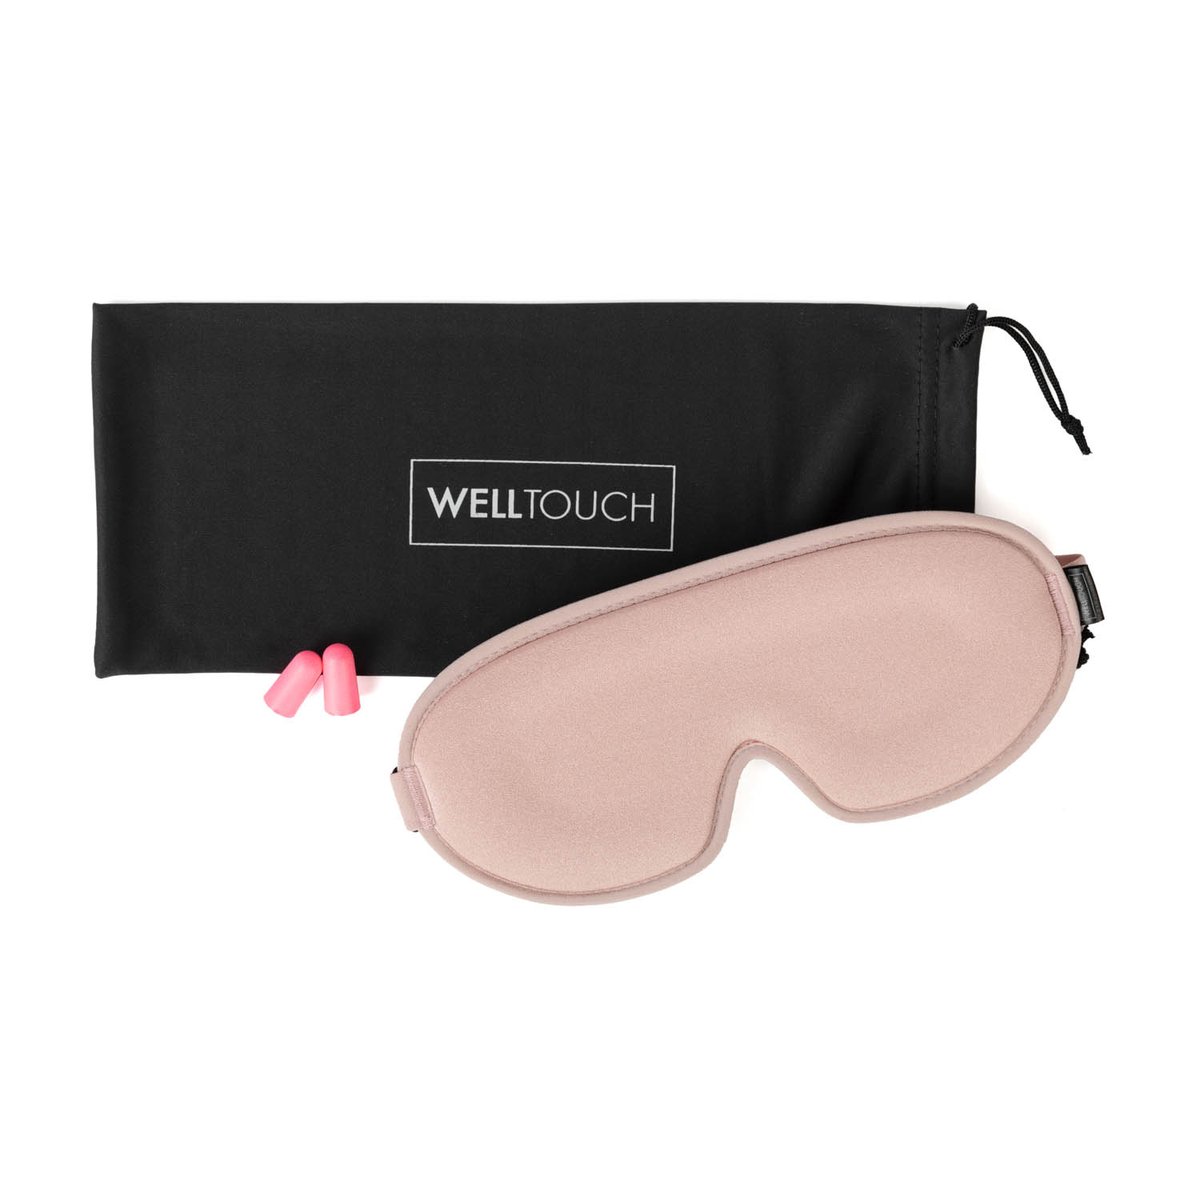 Need a last minute Christmas gift? NEW in stock the Luxury WellTouch Eye and Sleep Mask for Deep Relaxation with 3D Memory Foam comes with ear plugs & pouch.

ruthwhiteyoga.com/Product/Luxury…

#Yoga #EyePillow #SleepMask #Present #Gift #StockingFiller #RuthWhiteYogaProducts